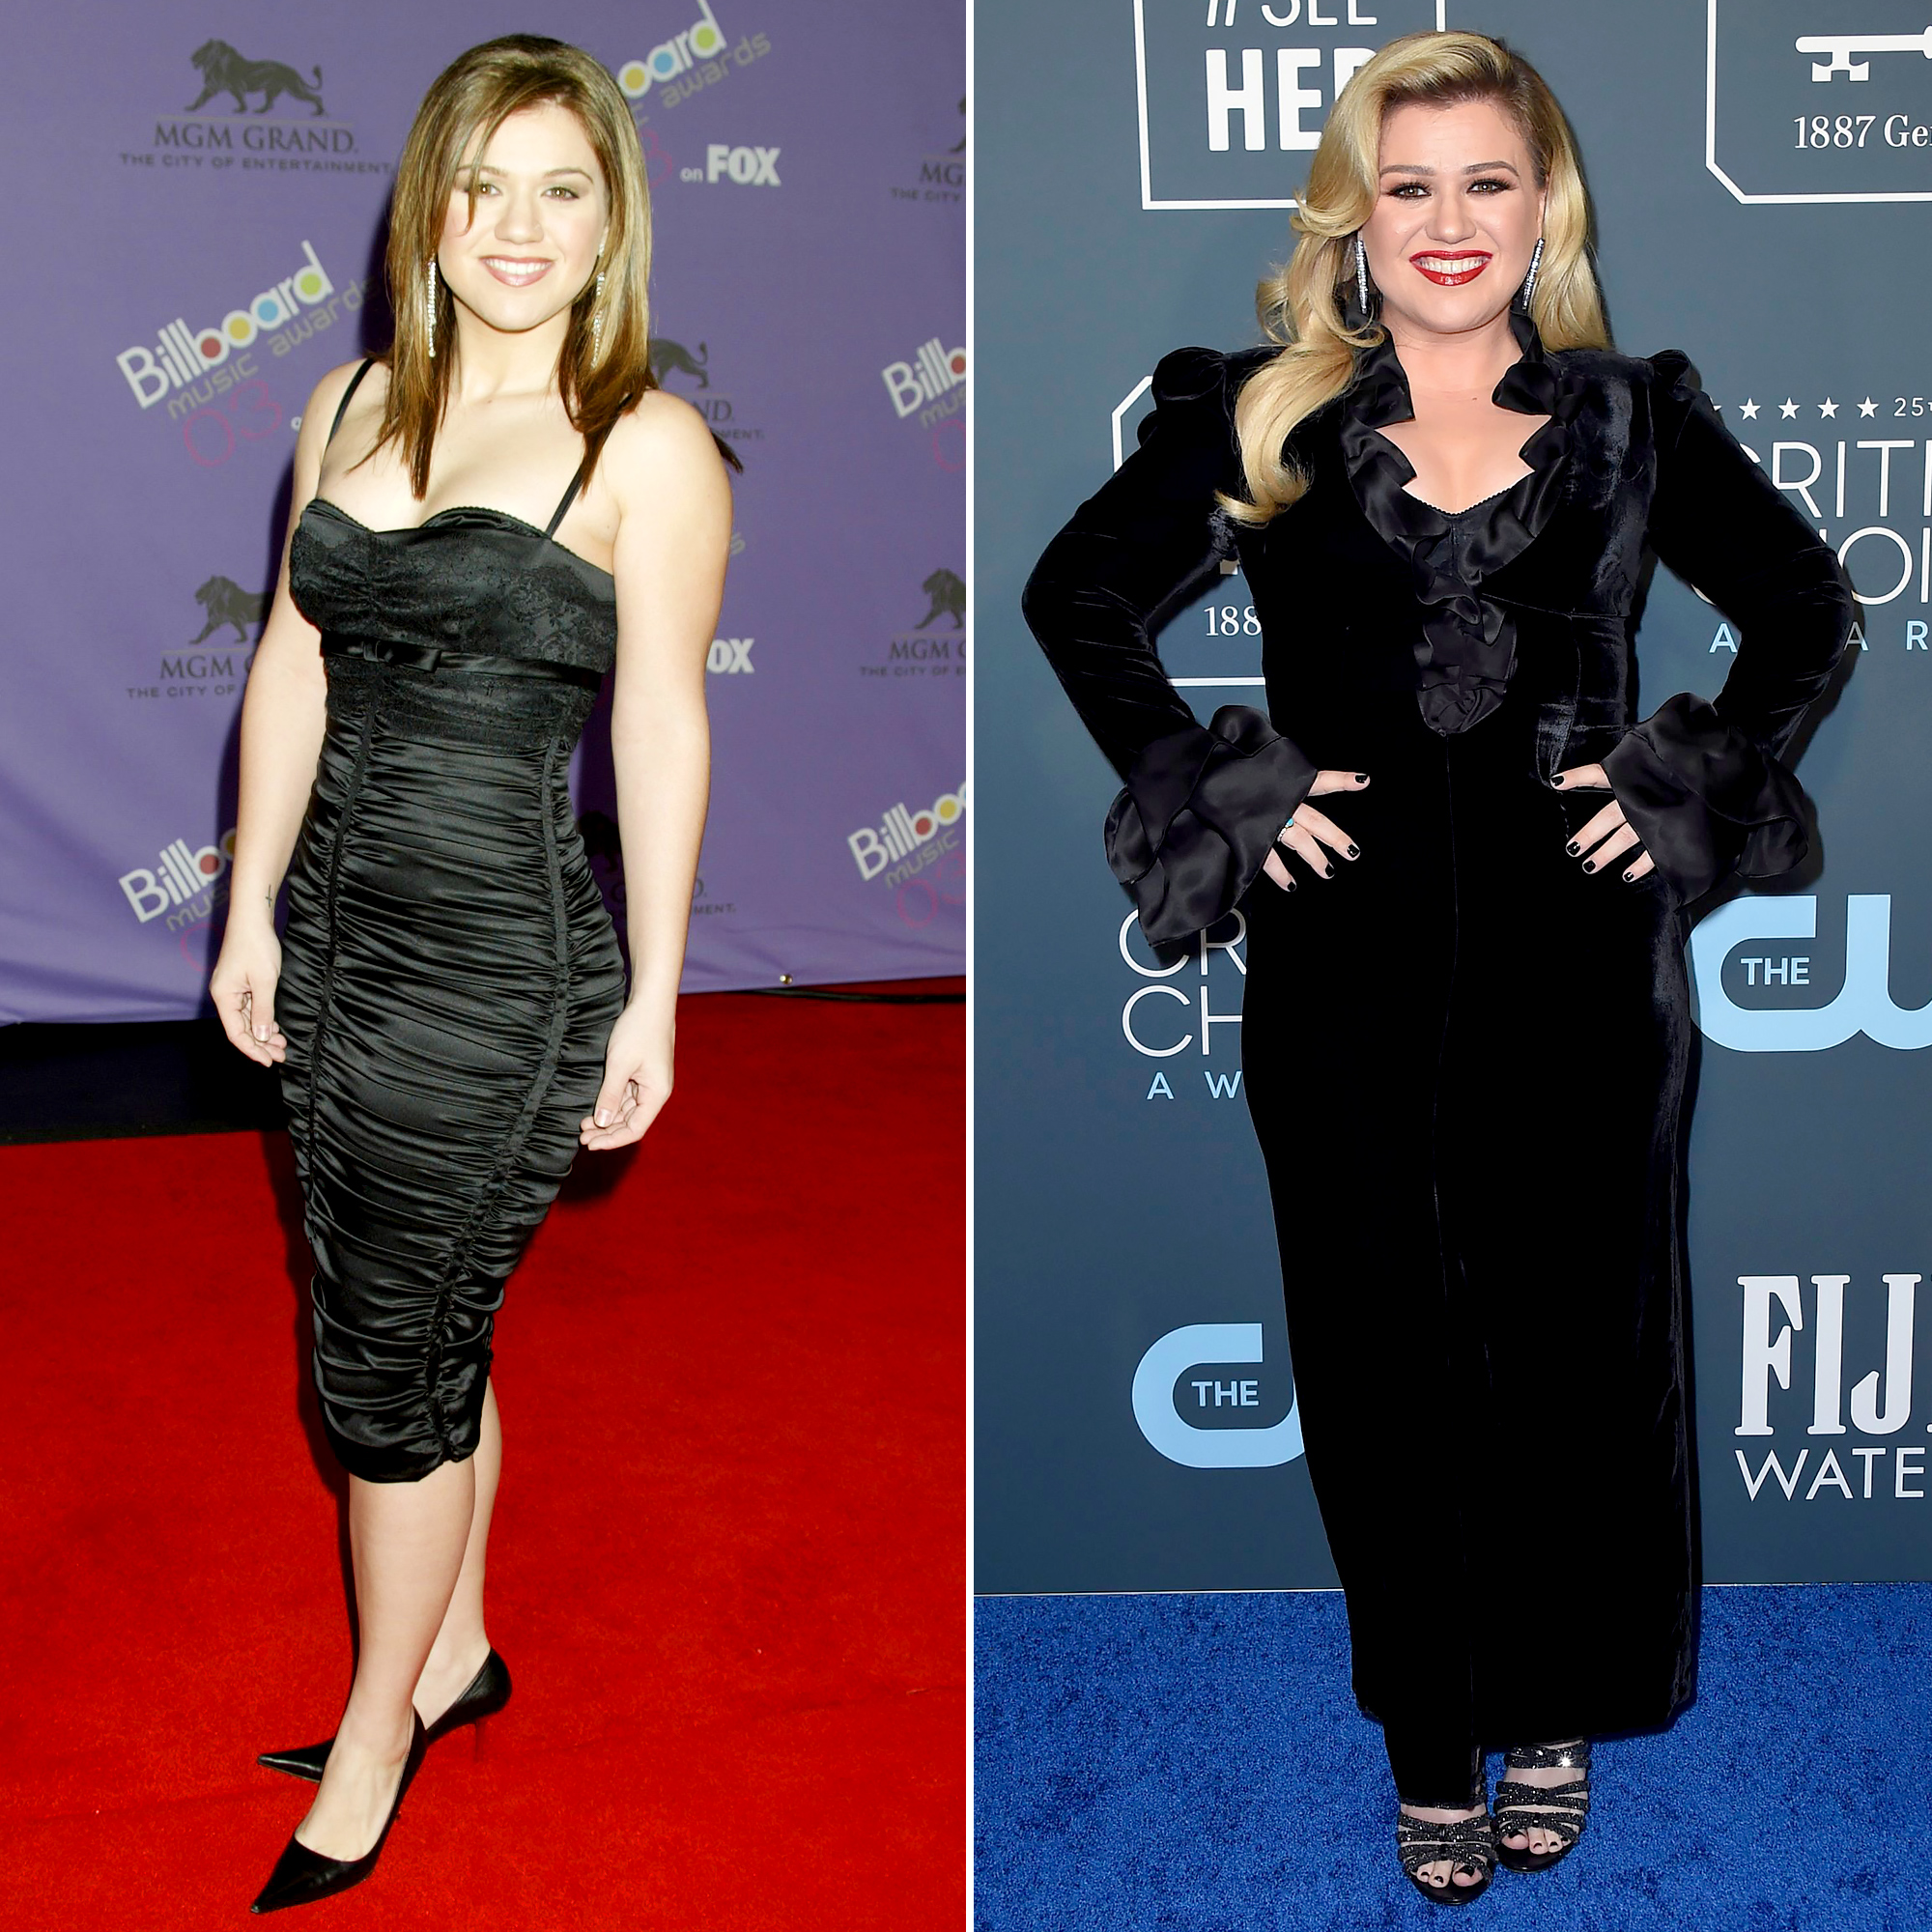 https://www.usmagazine.com/wp-content/uploads/2020/06/Kelly-Clarkson-Felt-Pressure-About-Her-Body-While-She-Was-Thin.jpg?quality=70&strip=all